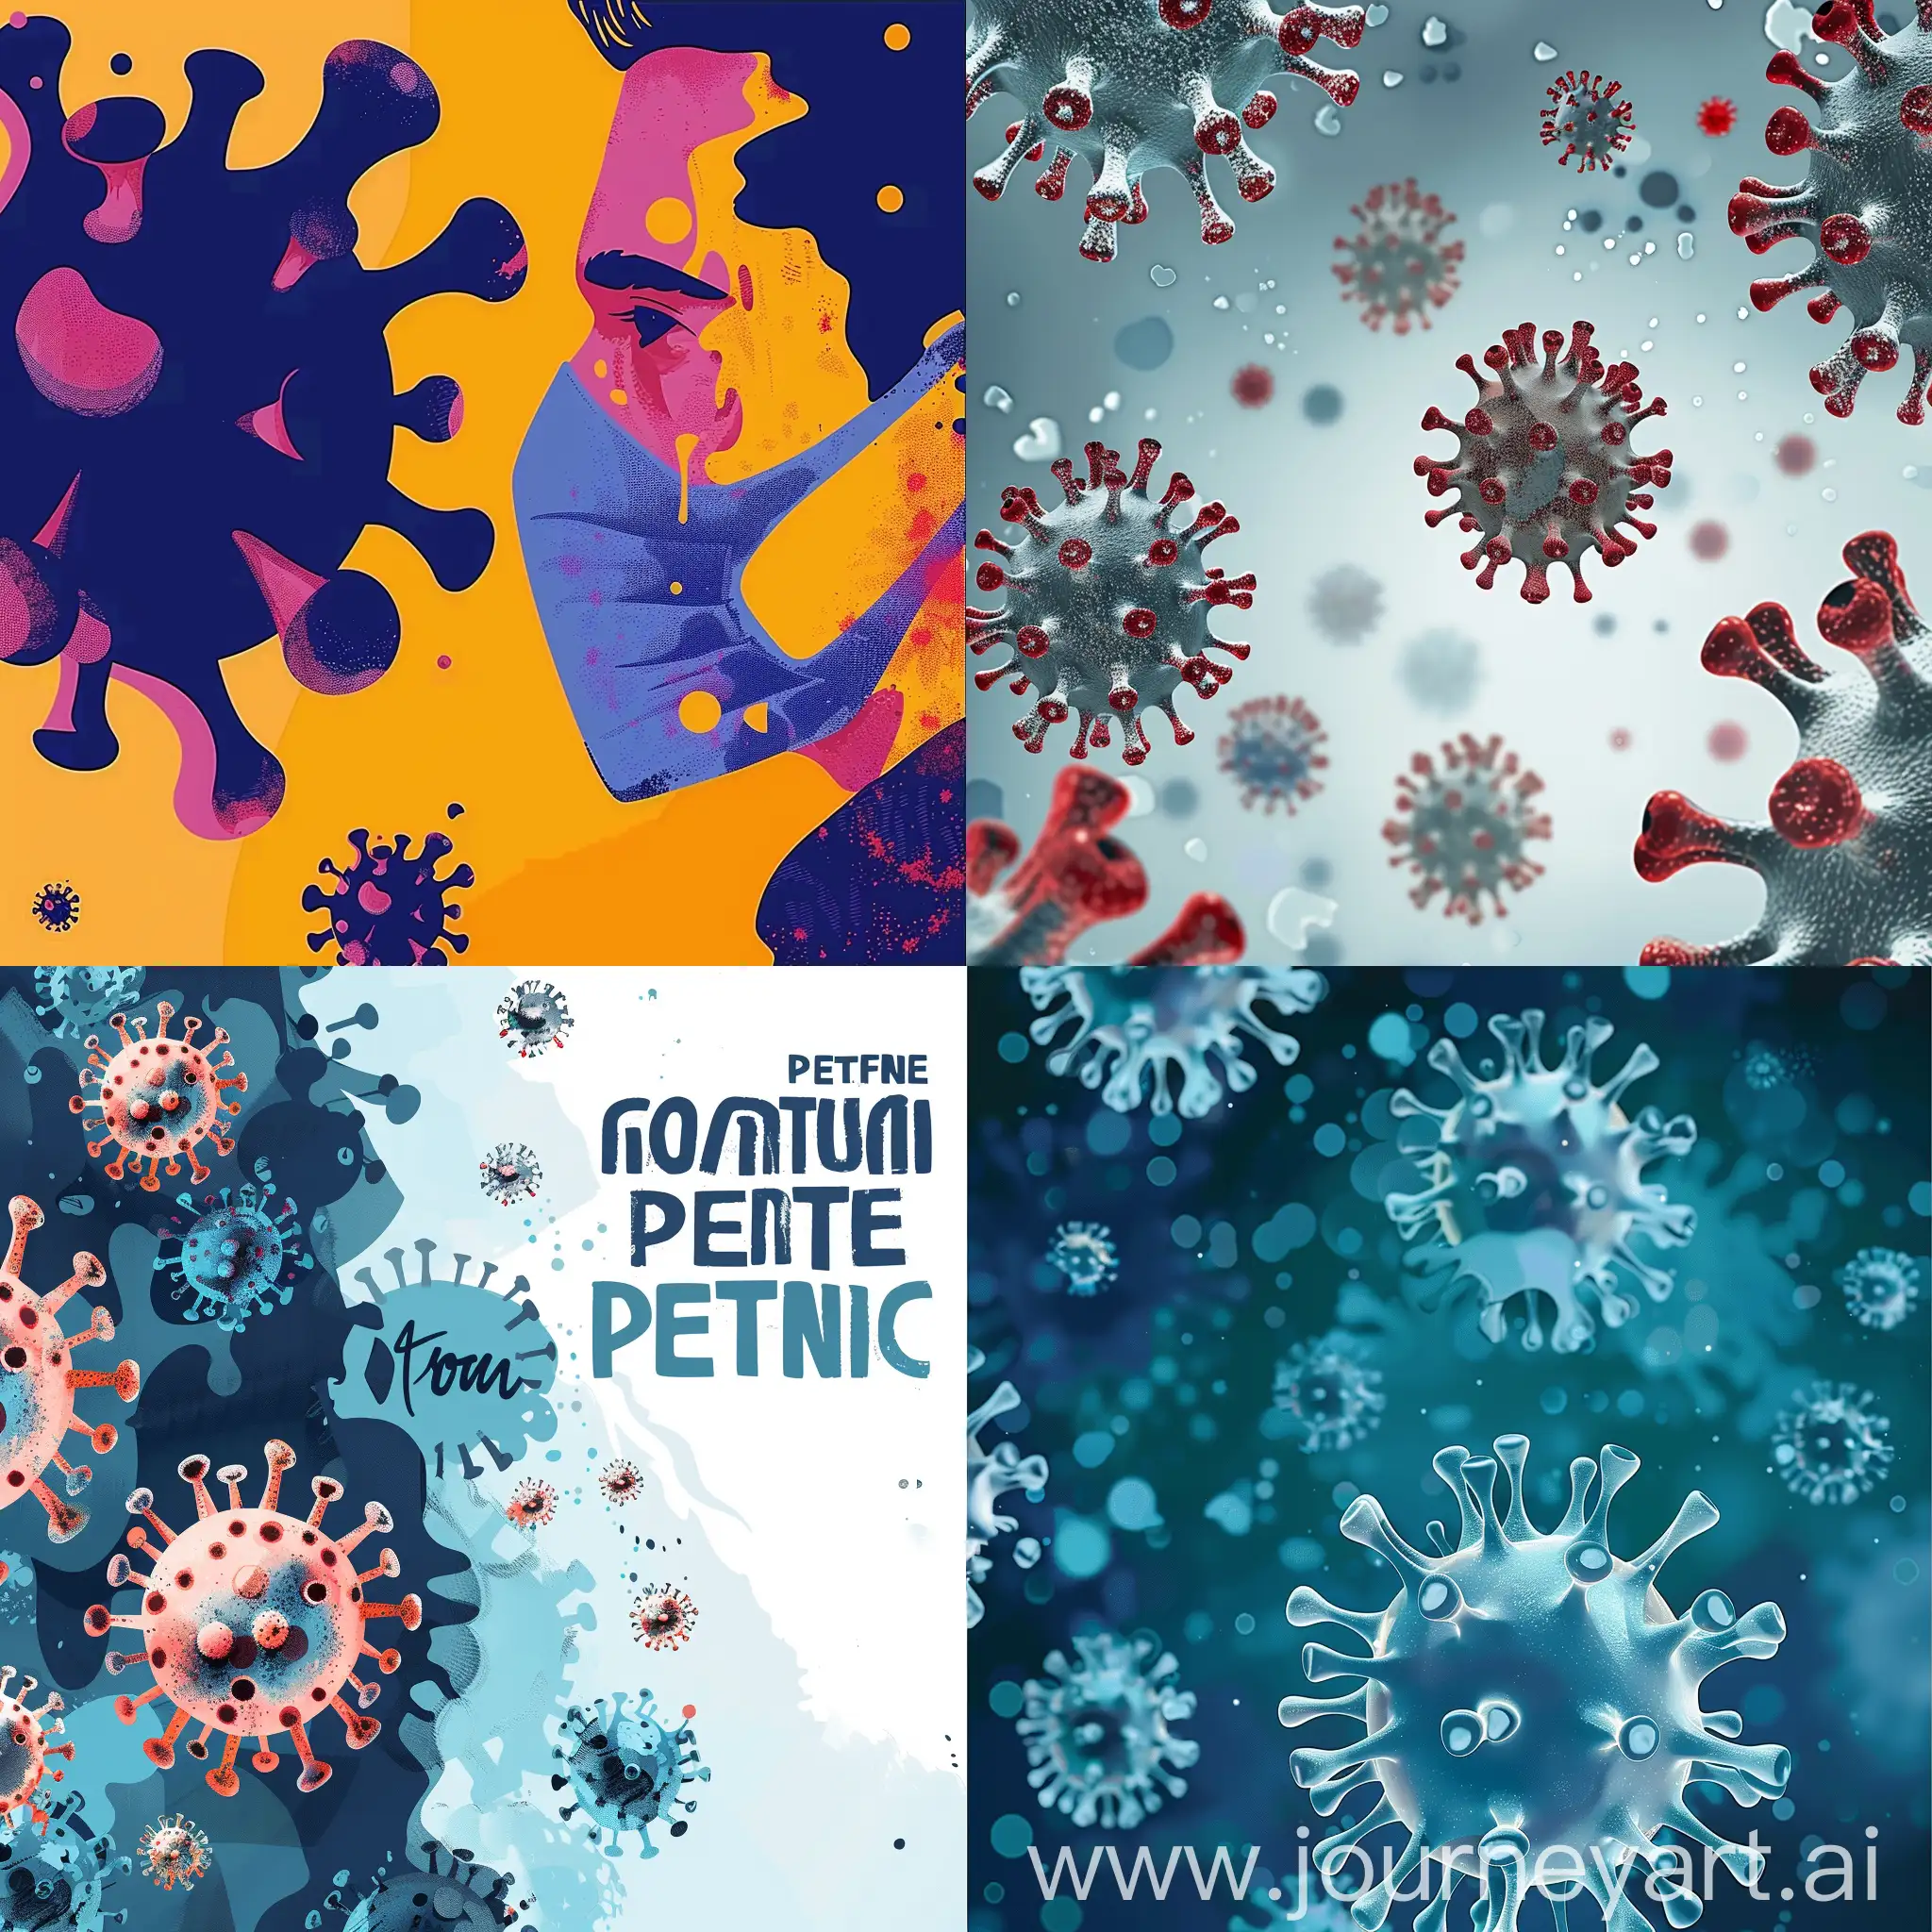 Epidemic-Prevention-Poster-Design-with-Distinctive-Visuals